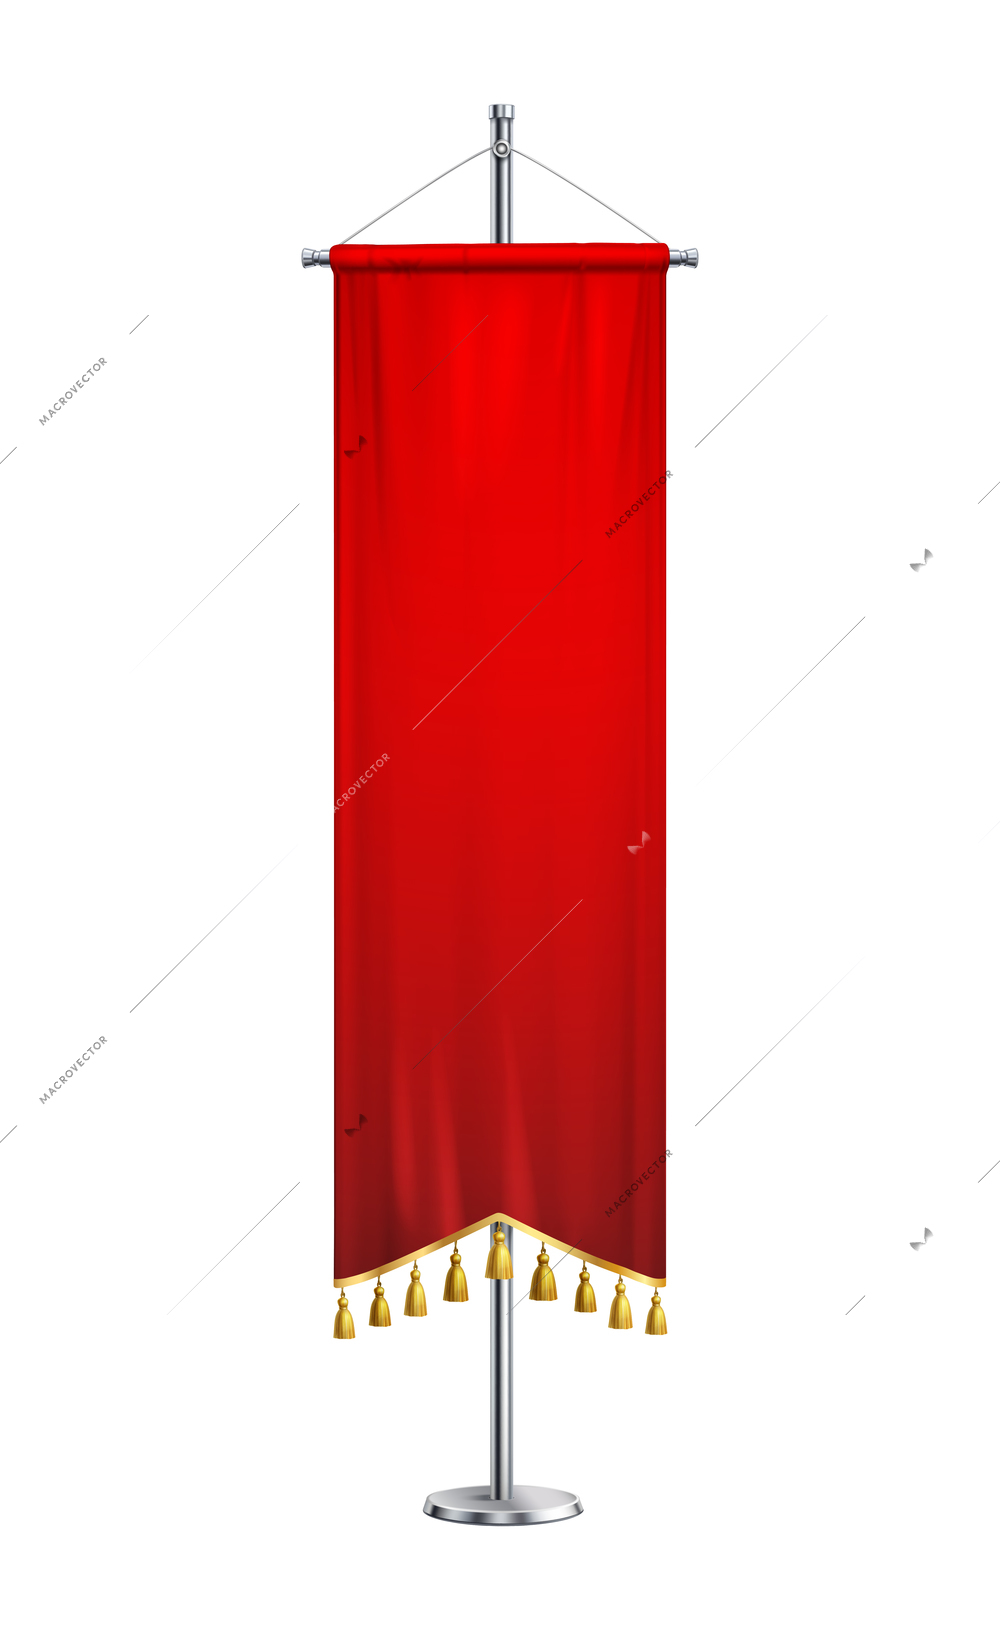 Red pennant with tassels on pedestal realistic composition with isolated image of pennon on stand vector illustration